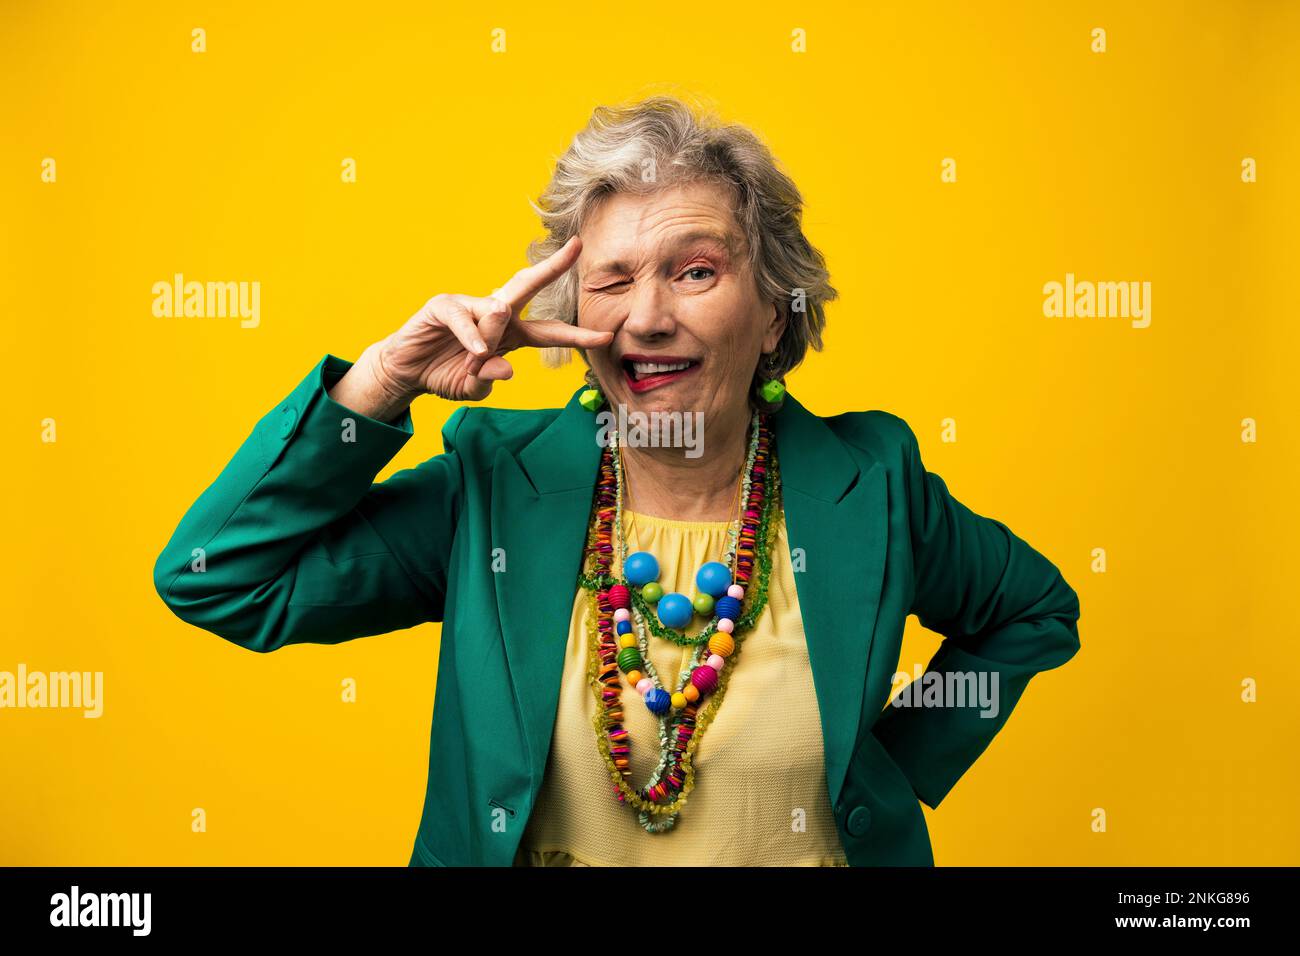 Senior woman with facial expressions against yellow background Stock Photo